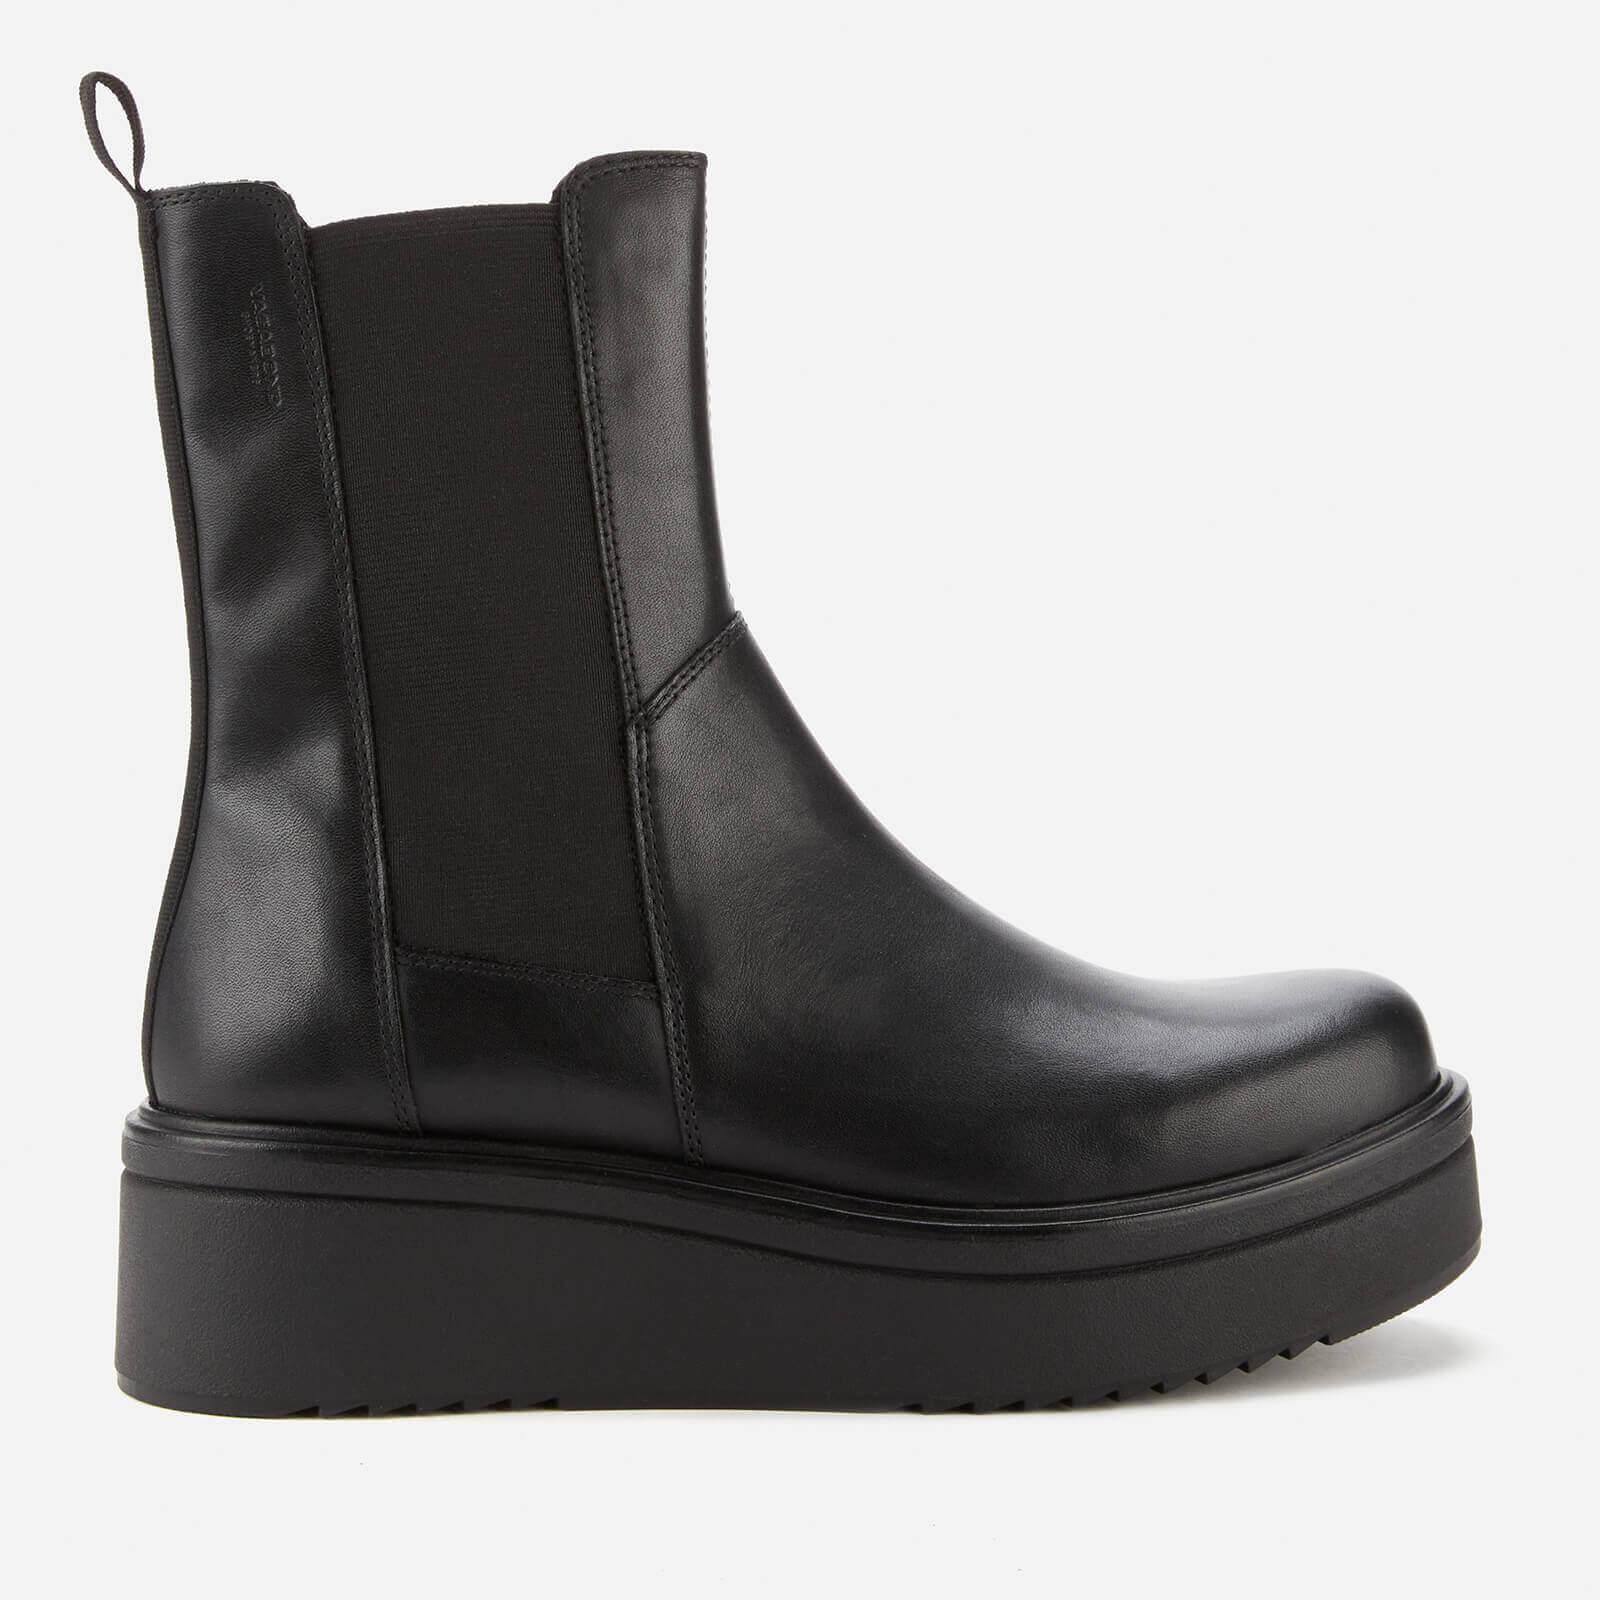 Vagabond Shoemakers Tara Leather Chelsea Boots in Black Lyst